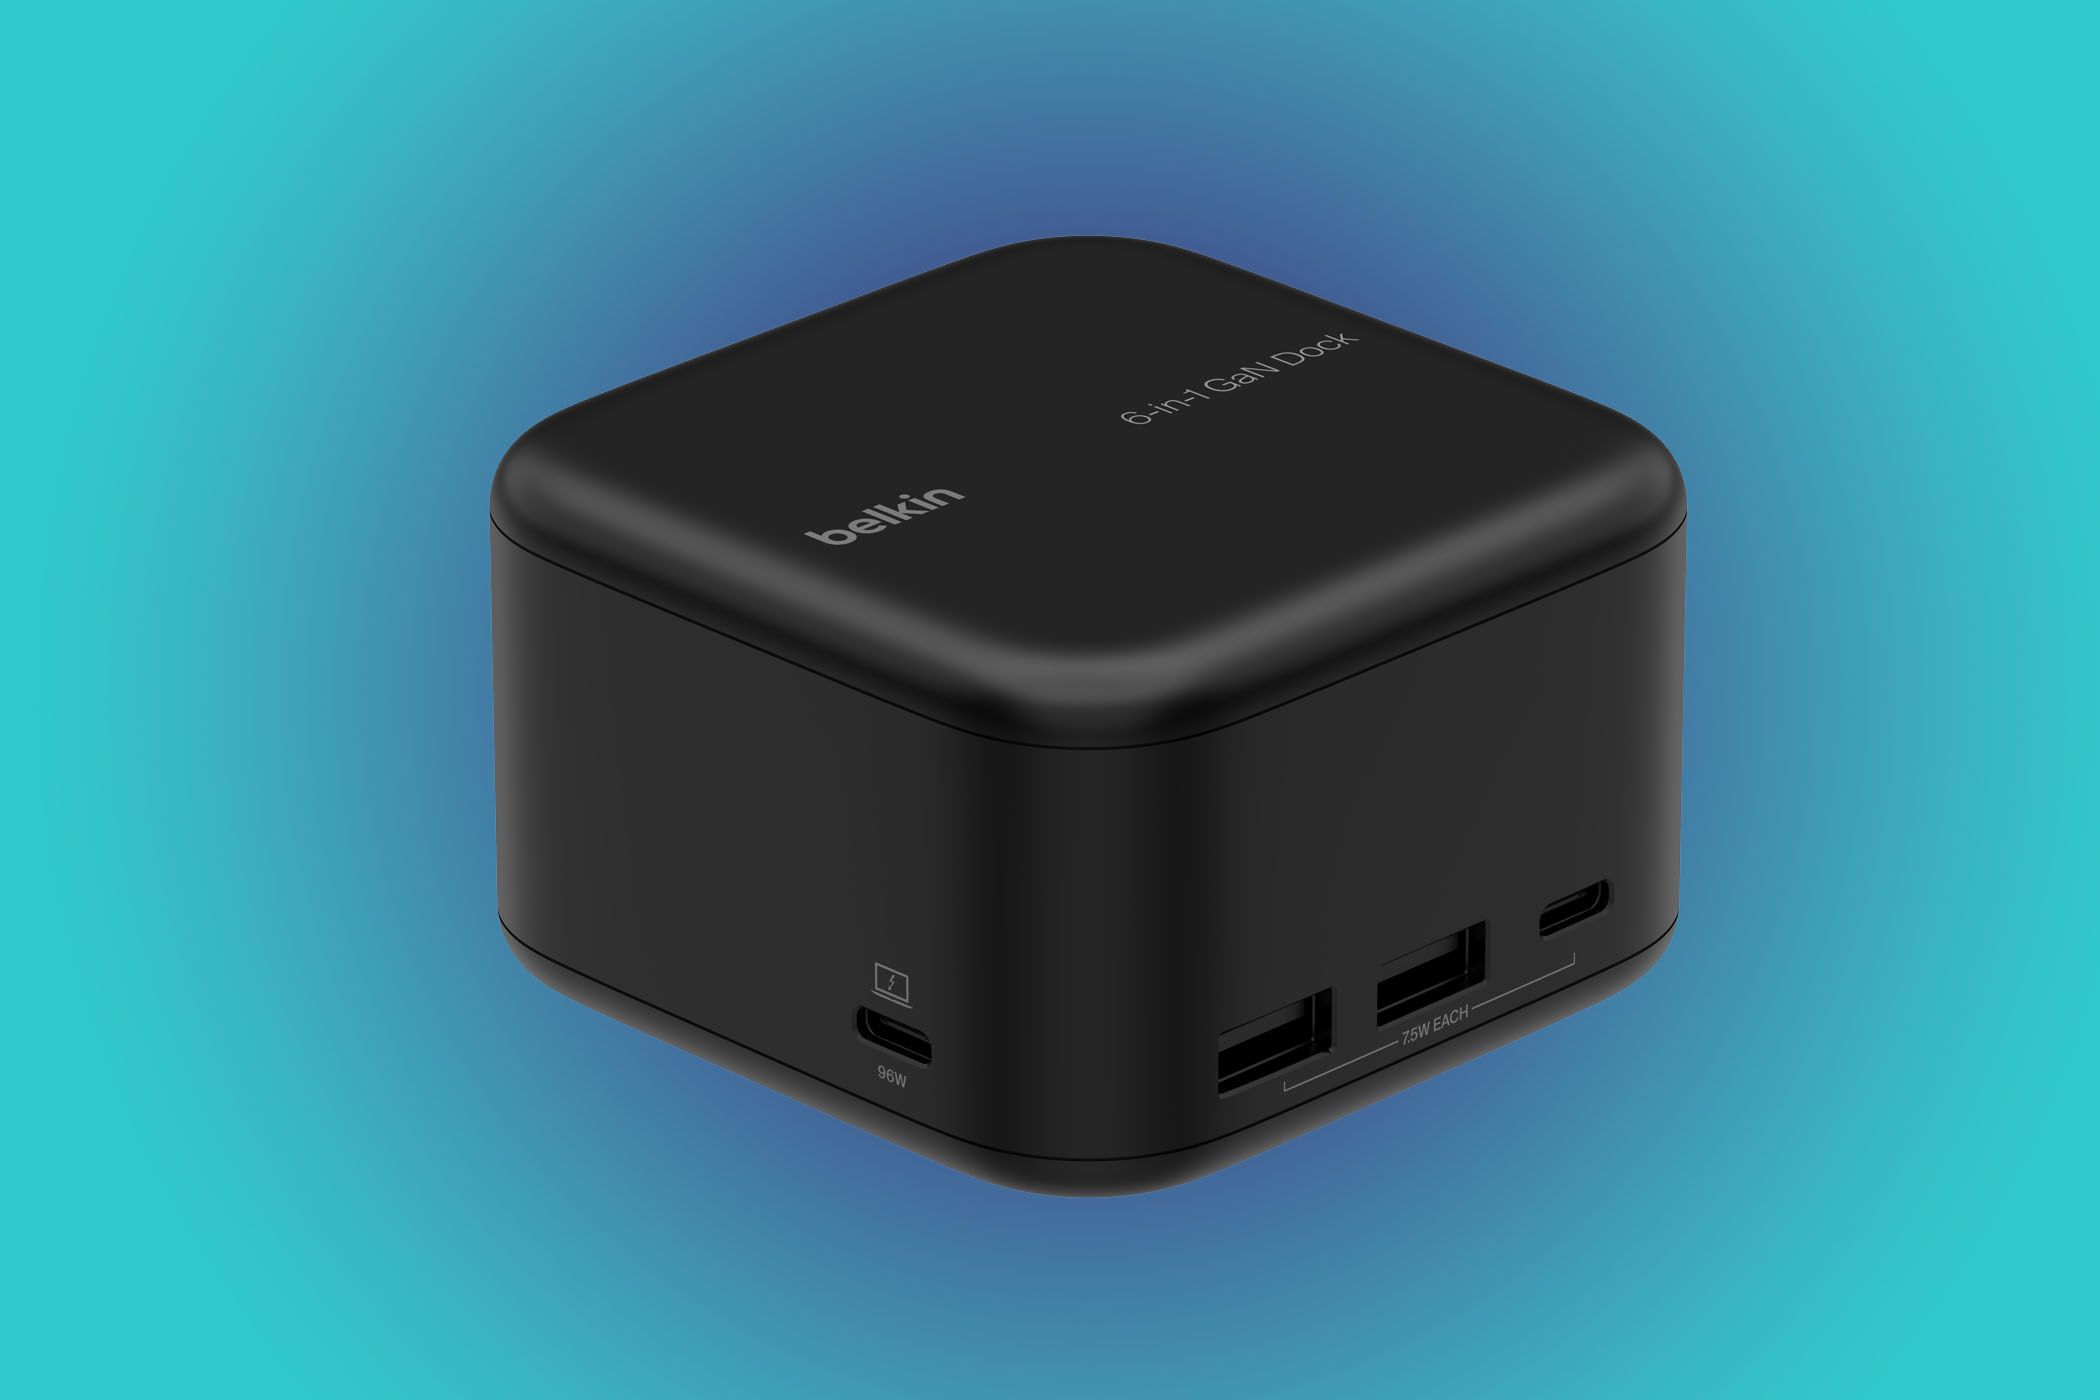 This New Belkin 6-in-1 Dock Has All The Ports